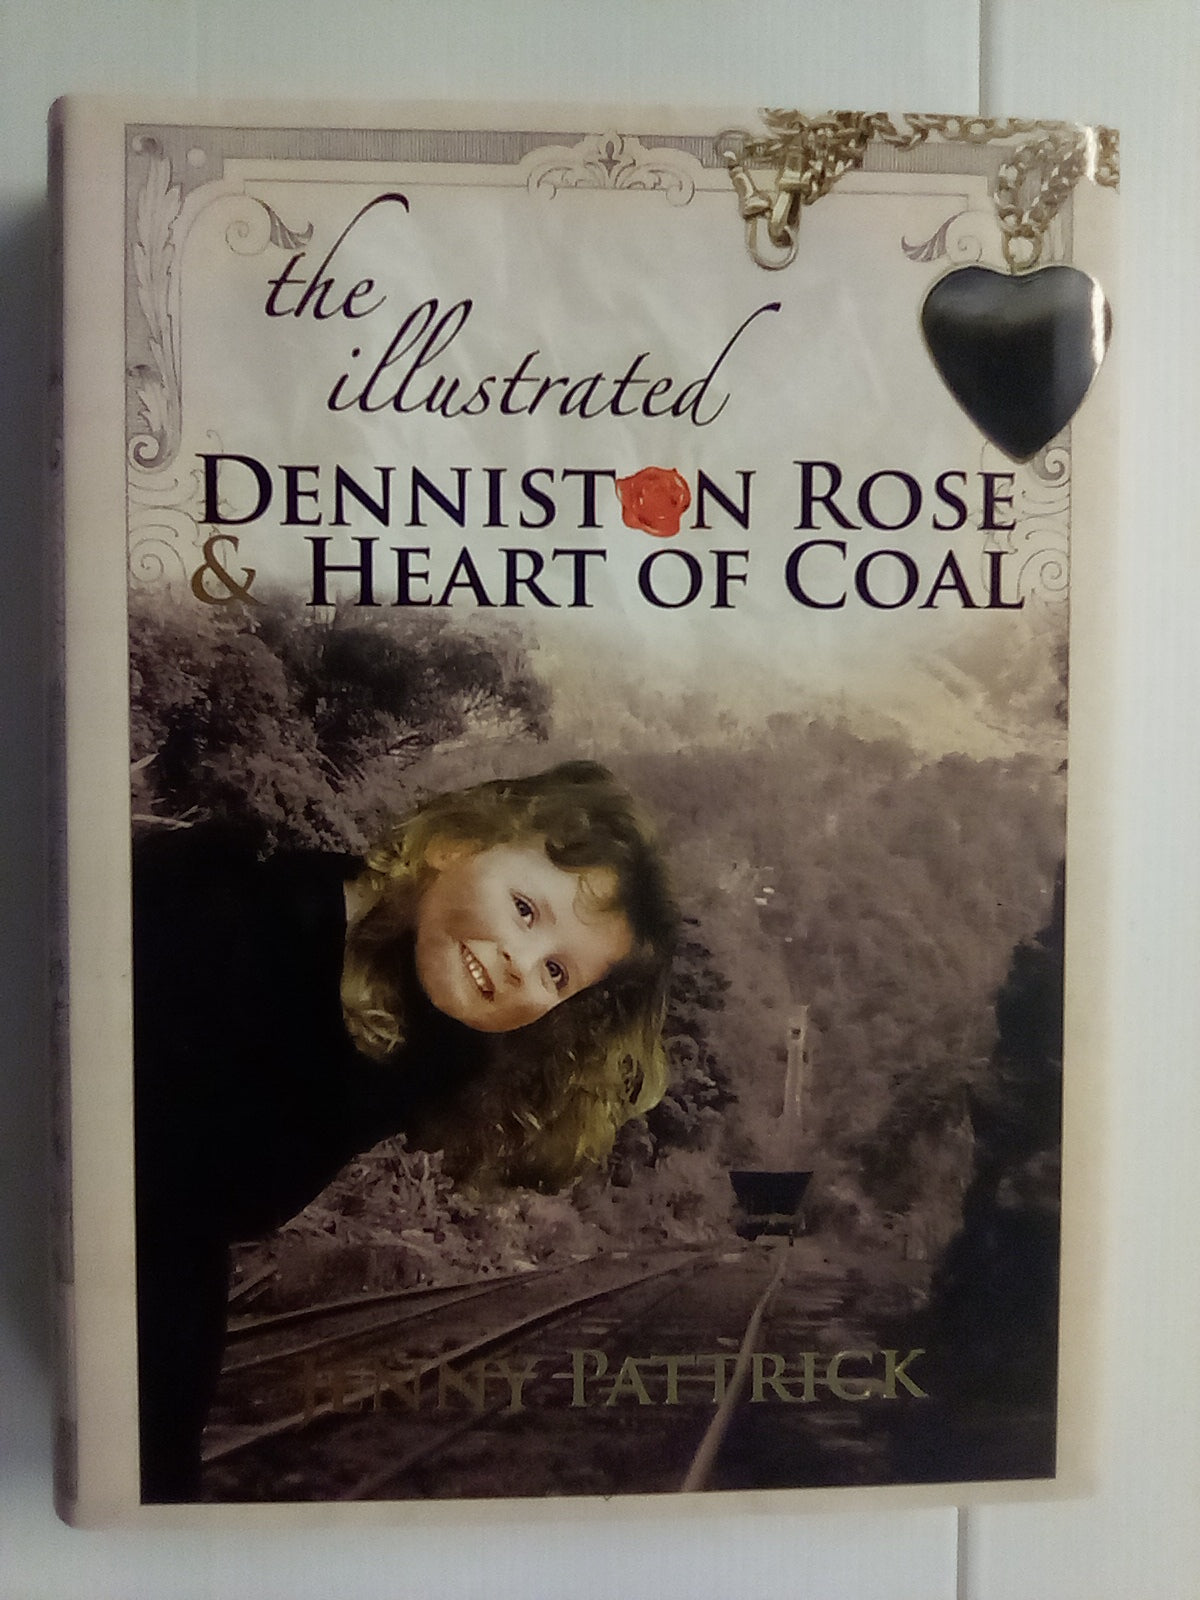 The Illustrated Denniston Rose & Heart of Coal by Jenny Pattrick